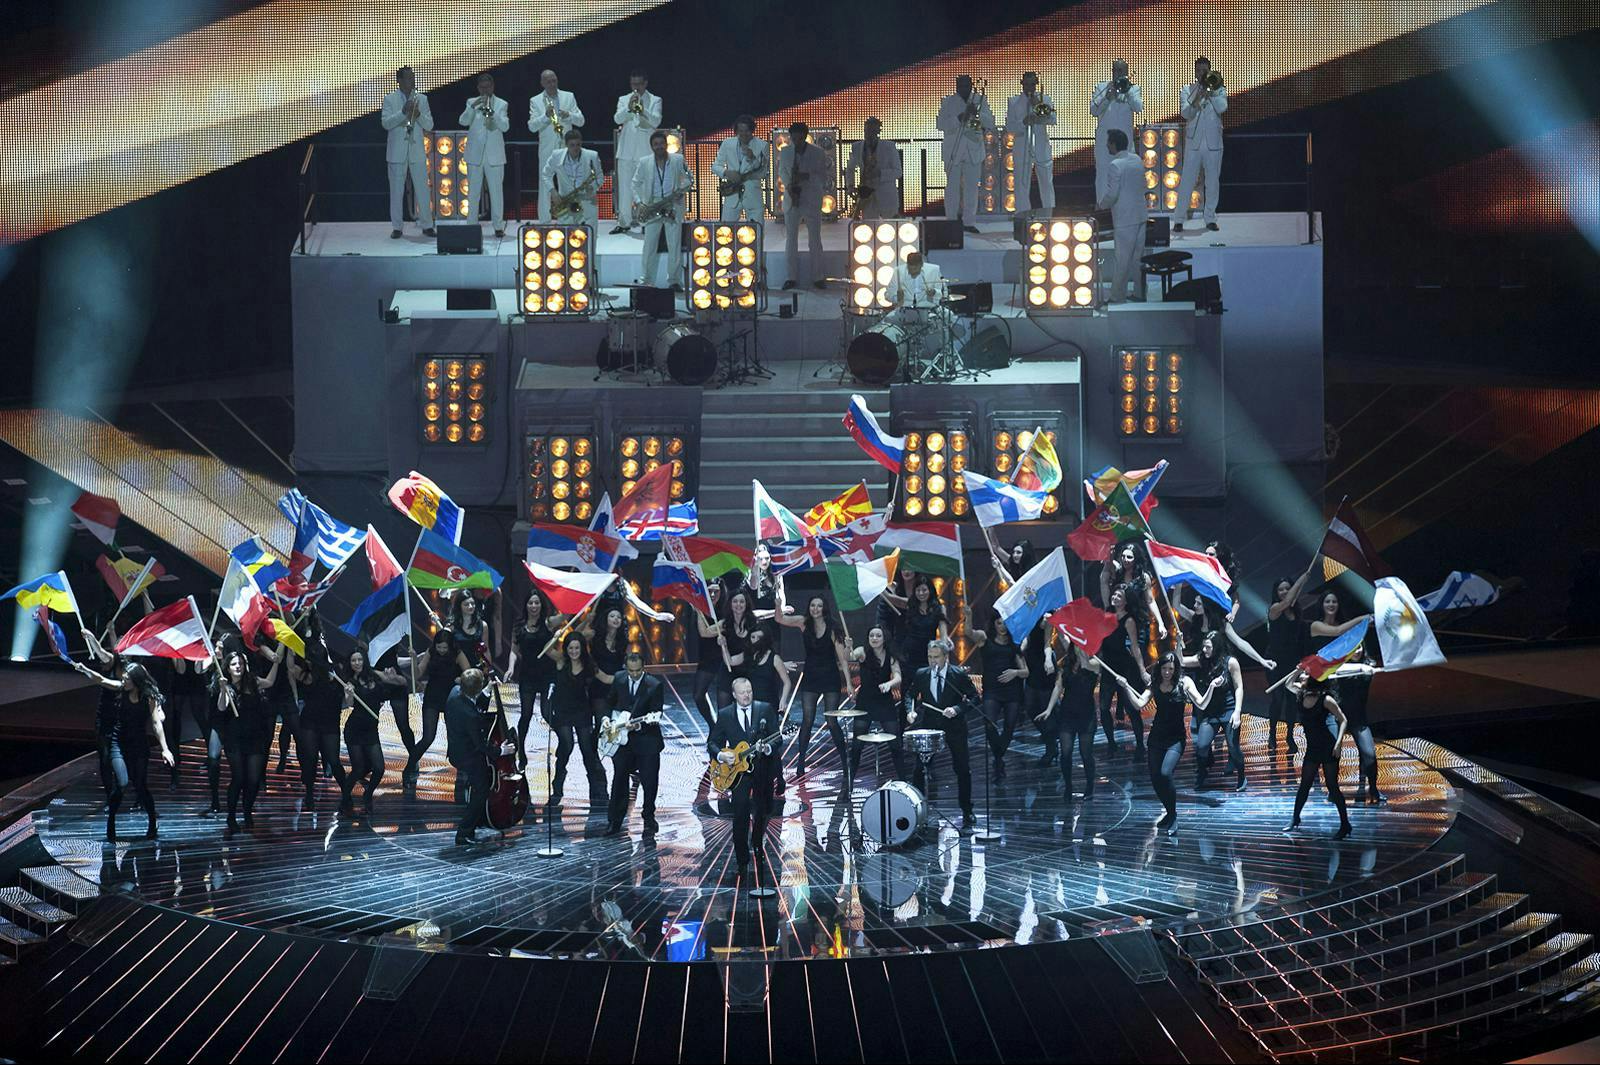 Eurovision song contest in Dusseldorf, 2011. Iceland loves Eurovision.